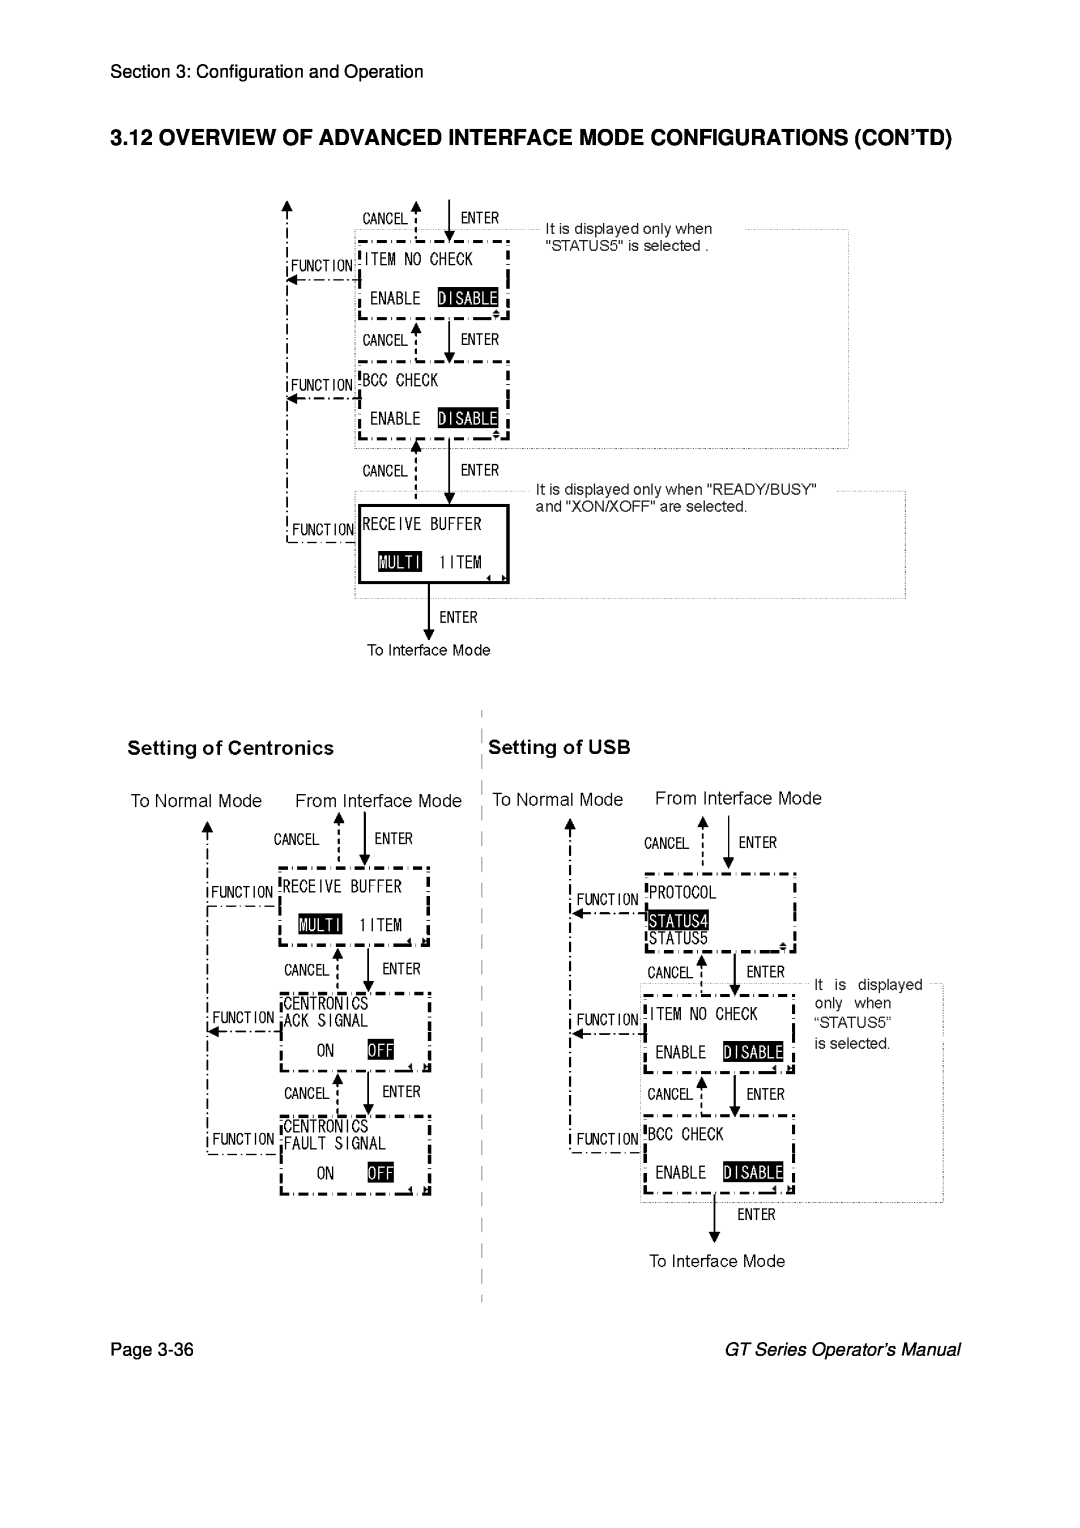 SATO GT424 manual Overview Of Advanced Interface Mode Configurations Con’Td, Configuration and Operation, Page 